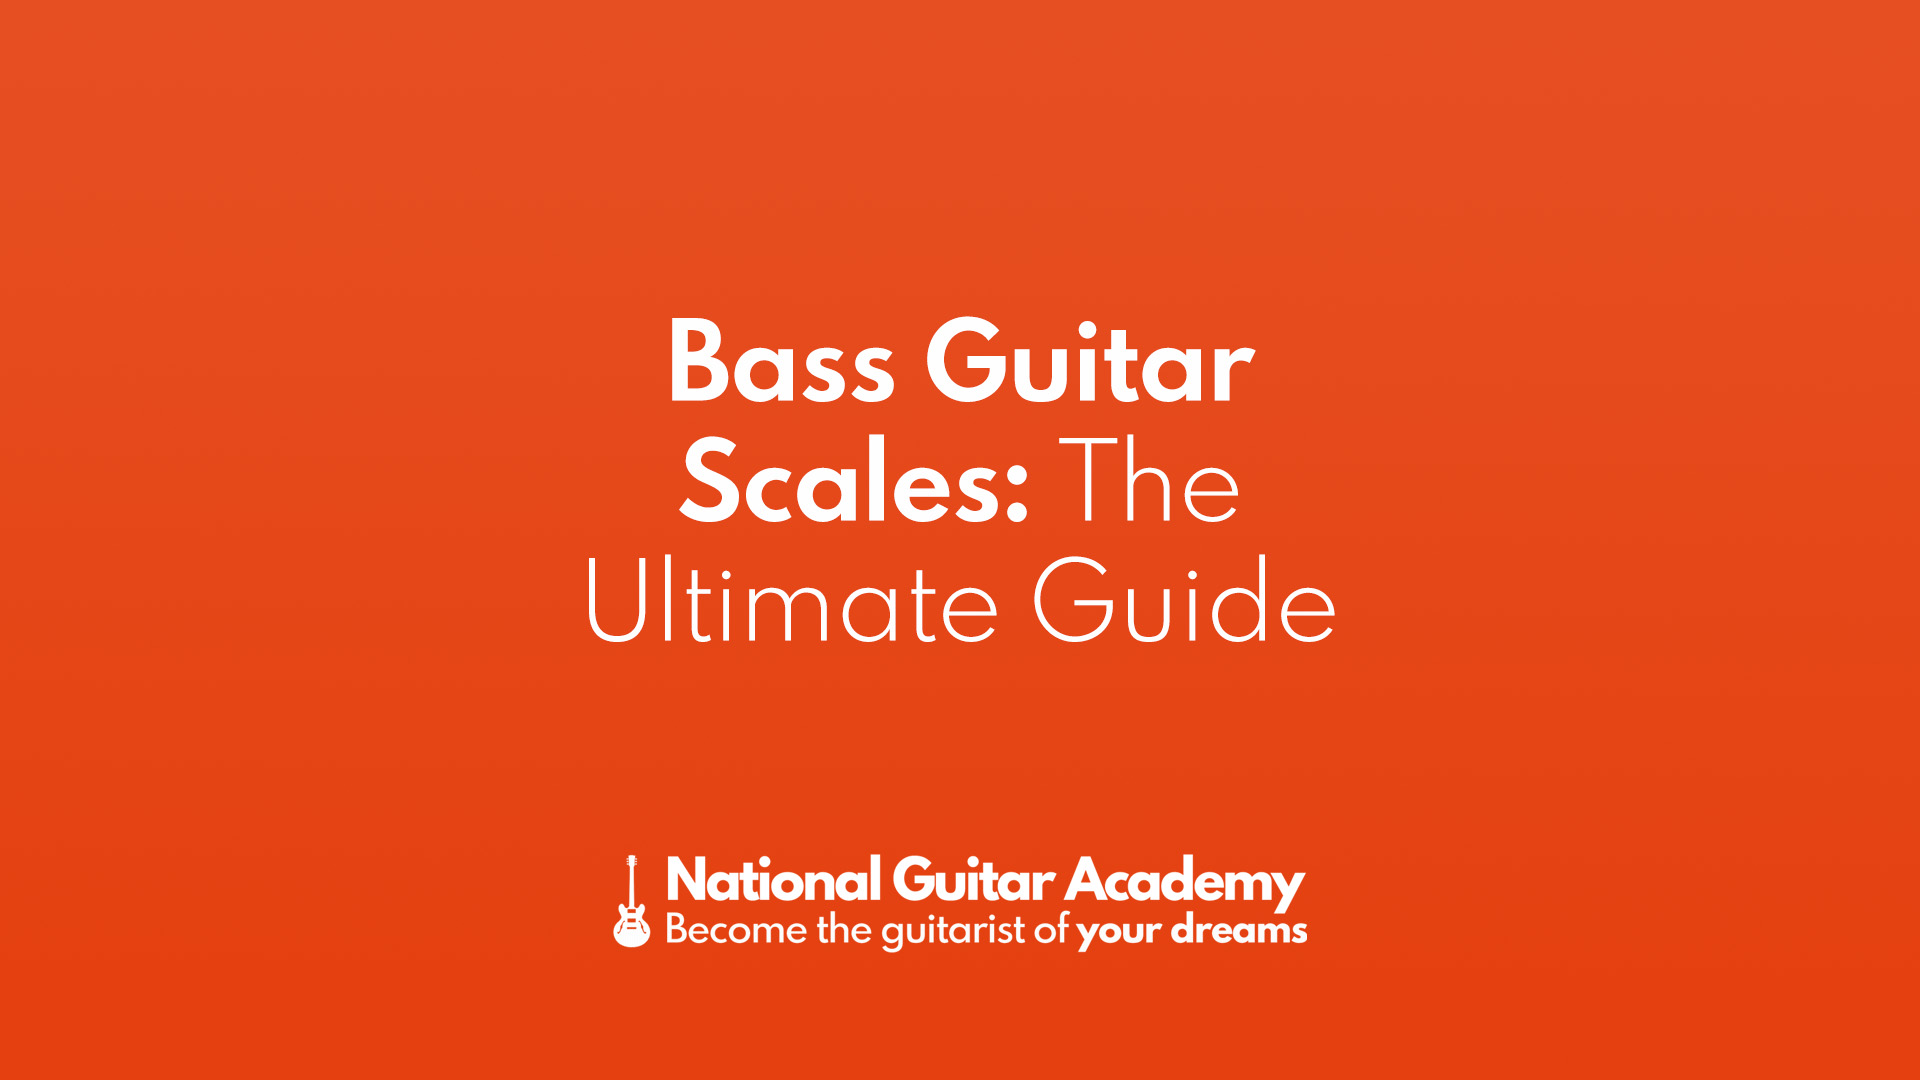 Bass Guitar Scales: The Ultimate Guide - National Guitar Academy